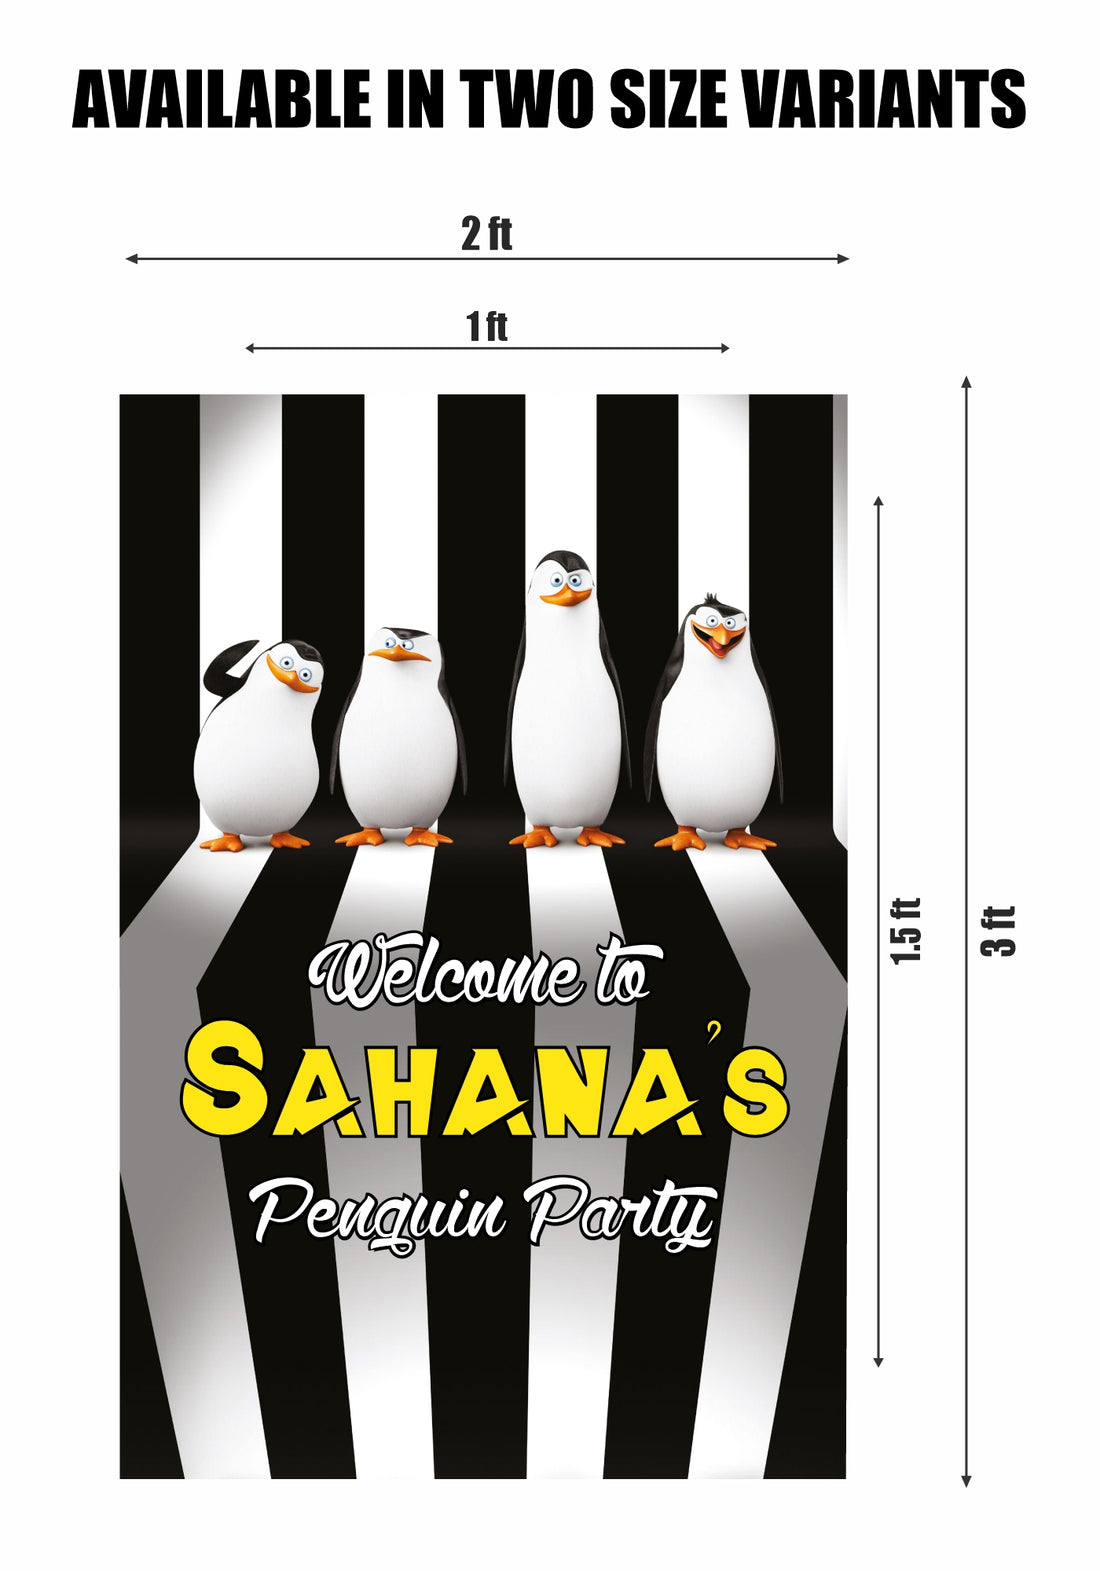 PSI Penguin Theme Personalized Welcome Board